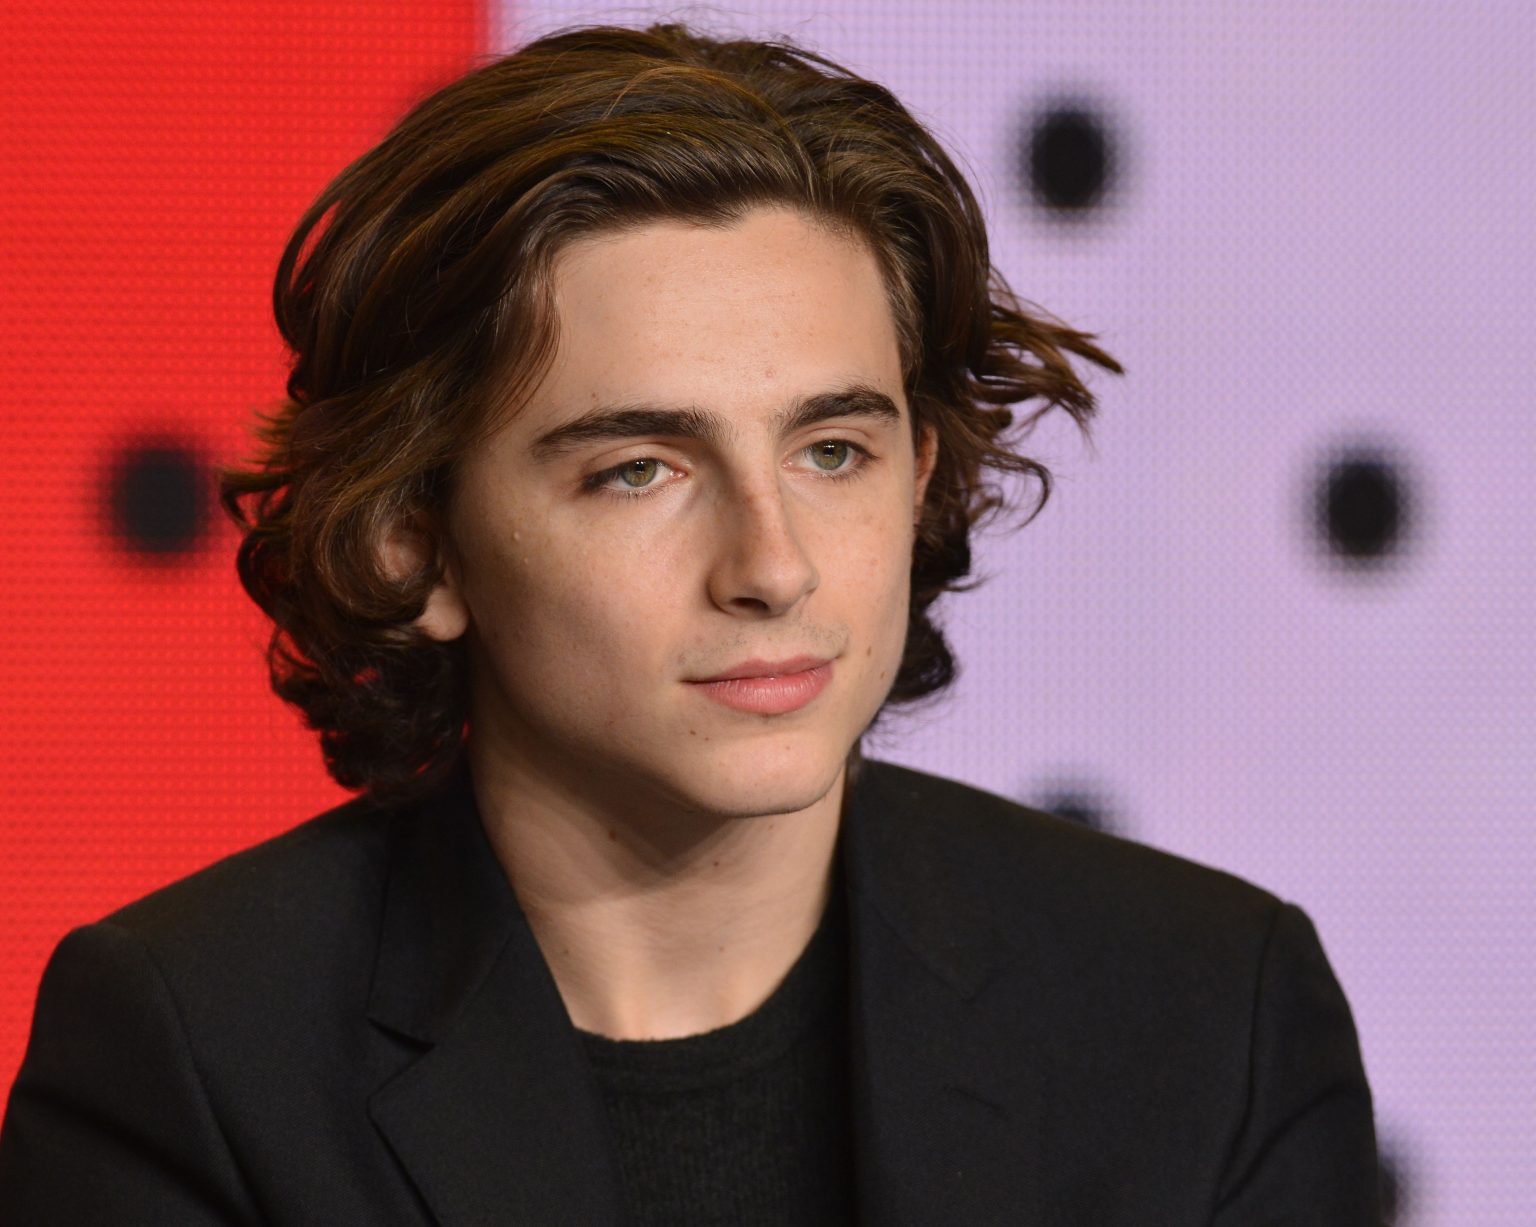 Timothee Chalamet Family Mother, Father, Wife, Girlfriend, Age, Height, Net Worth